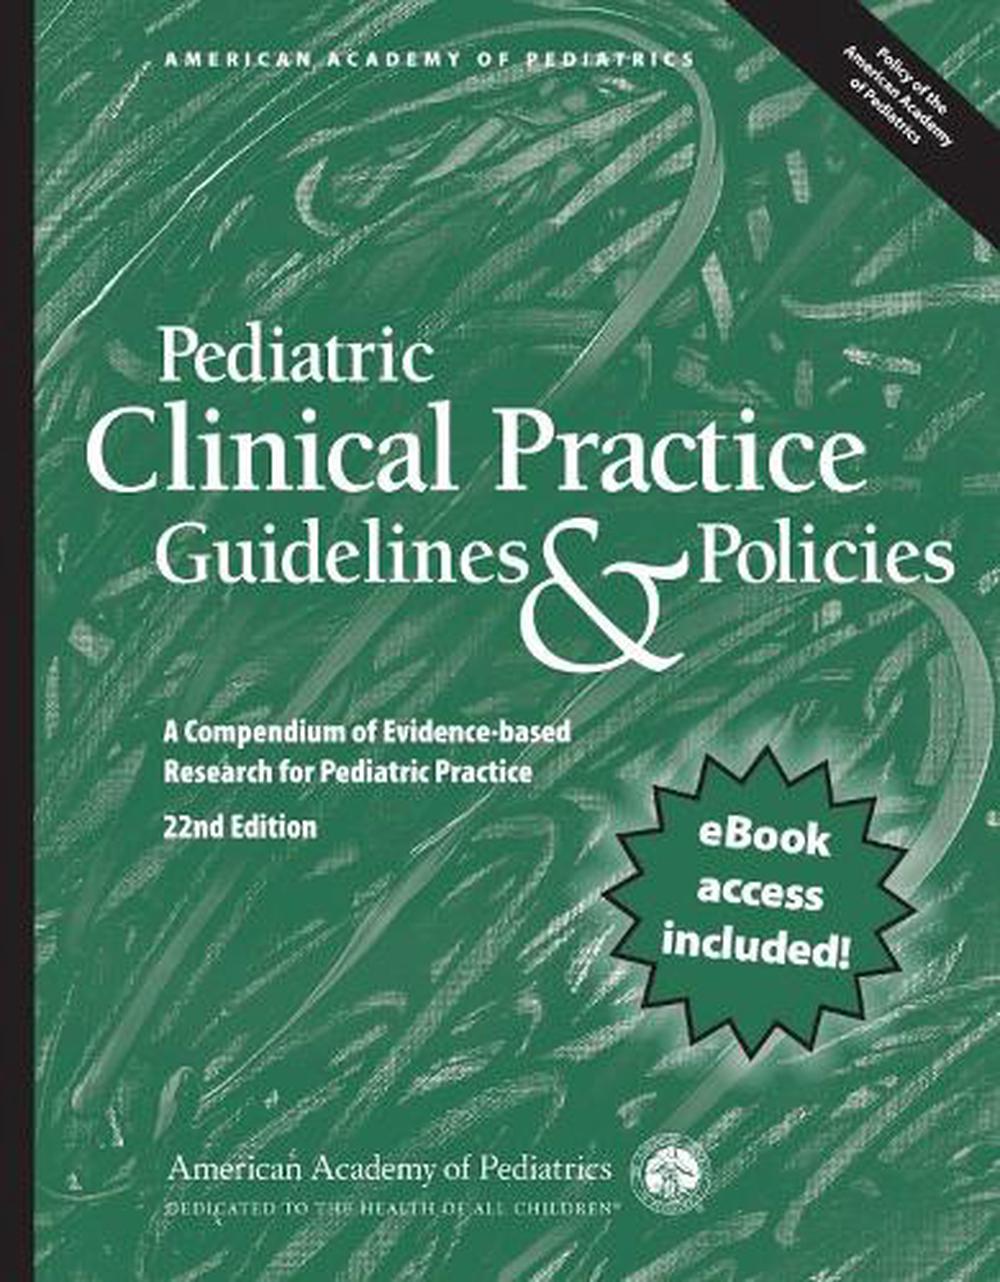 Pediatric Clinical Practice Guidelines & Policies by American Academy